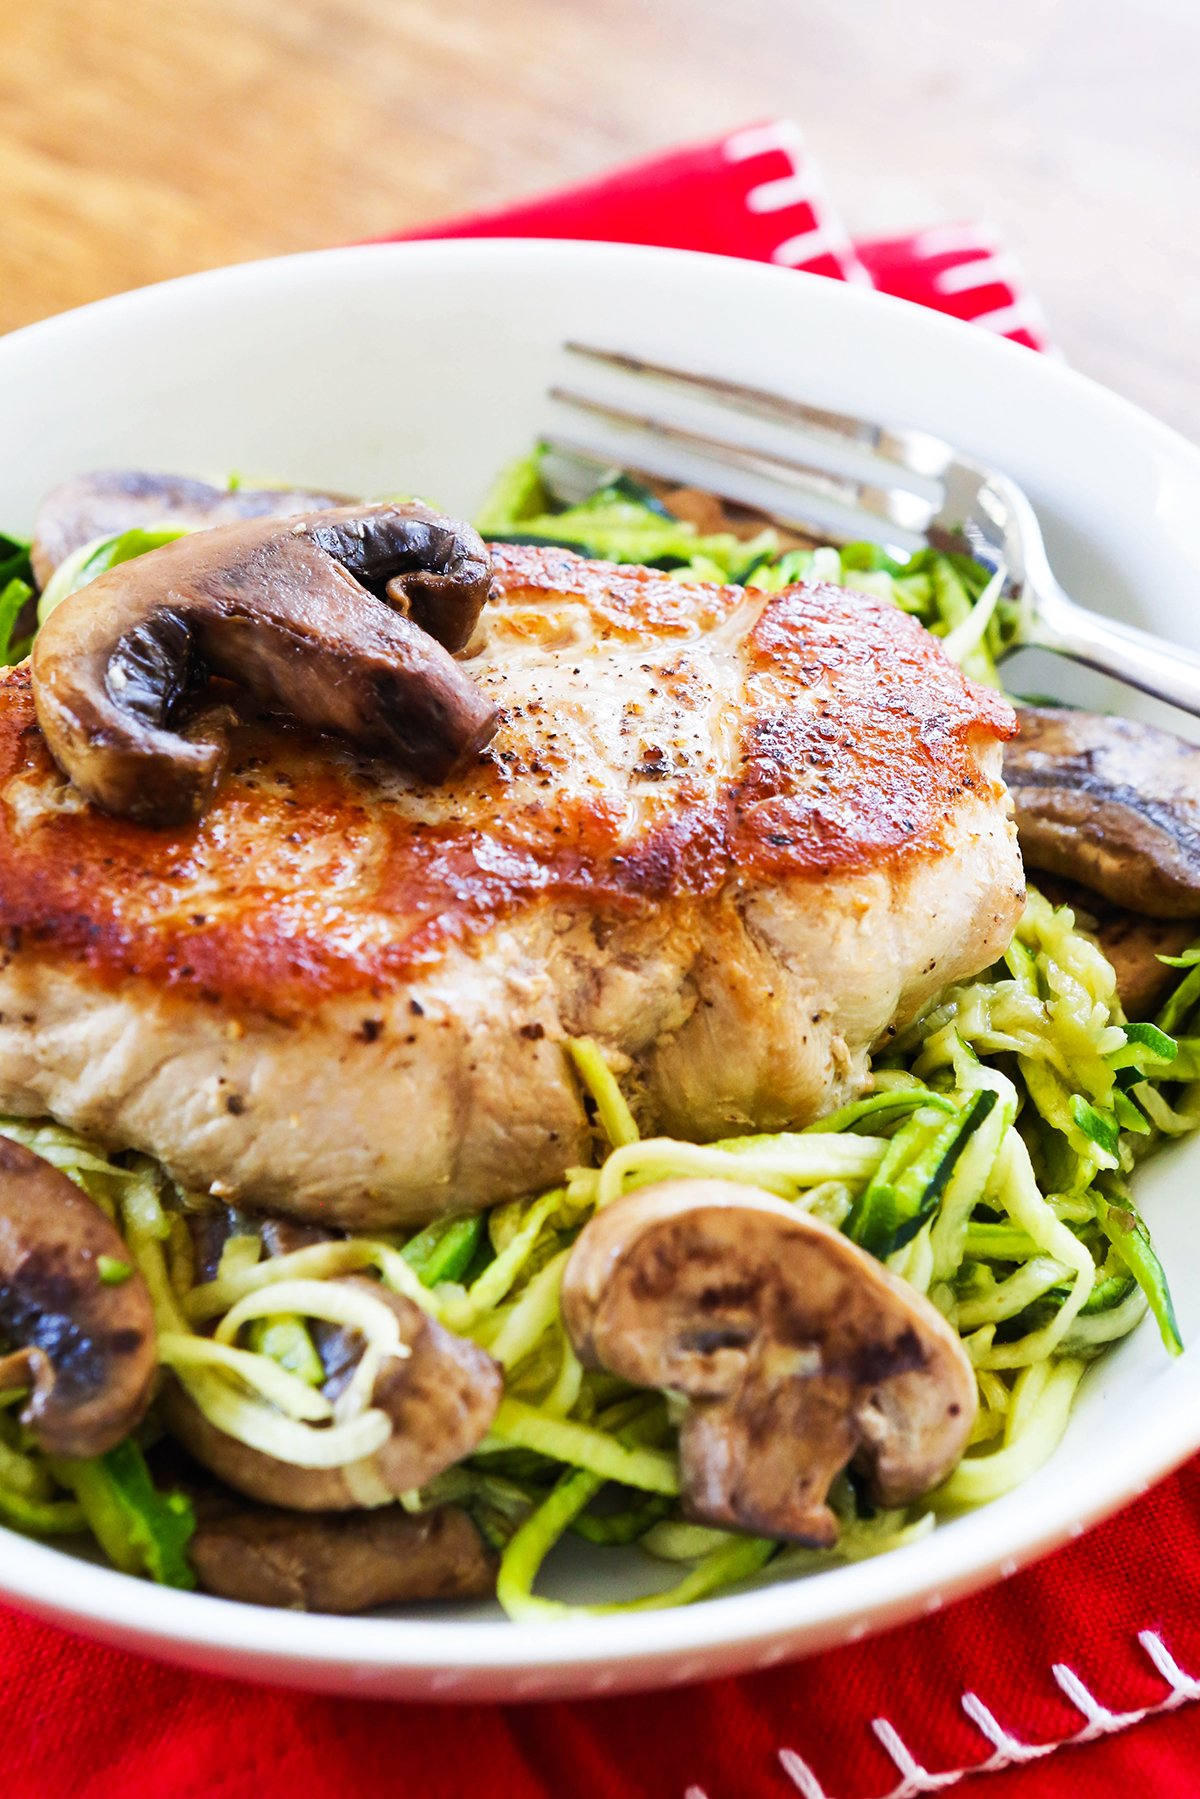 Plate of zoodles topped with a pork chop and sauteed mushrooms.